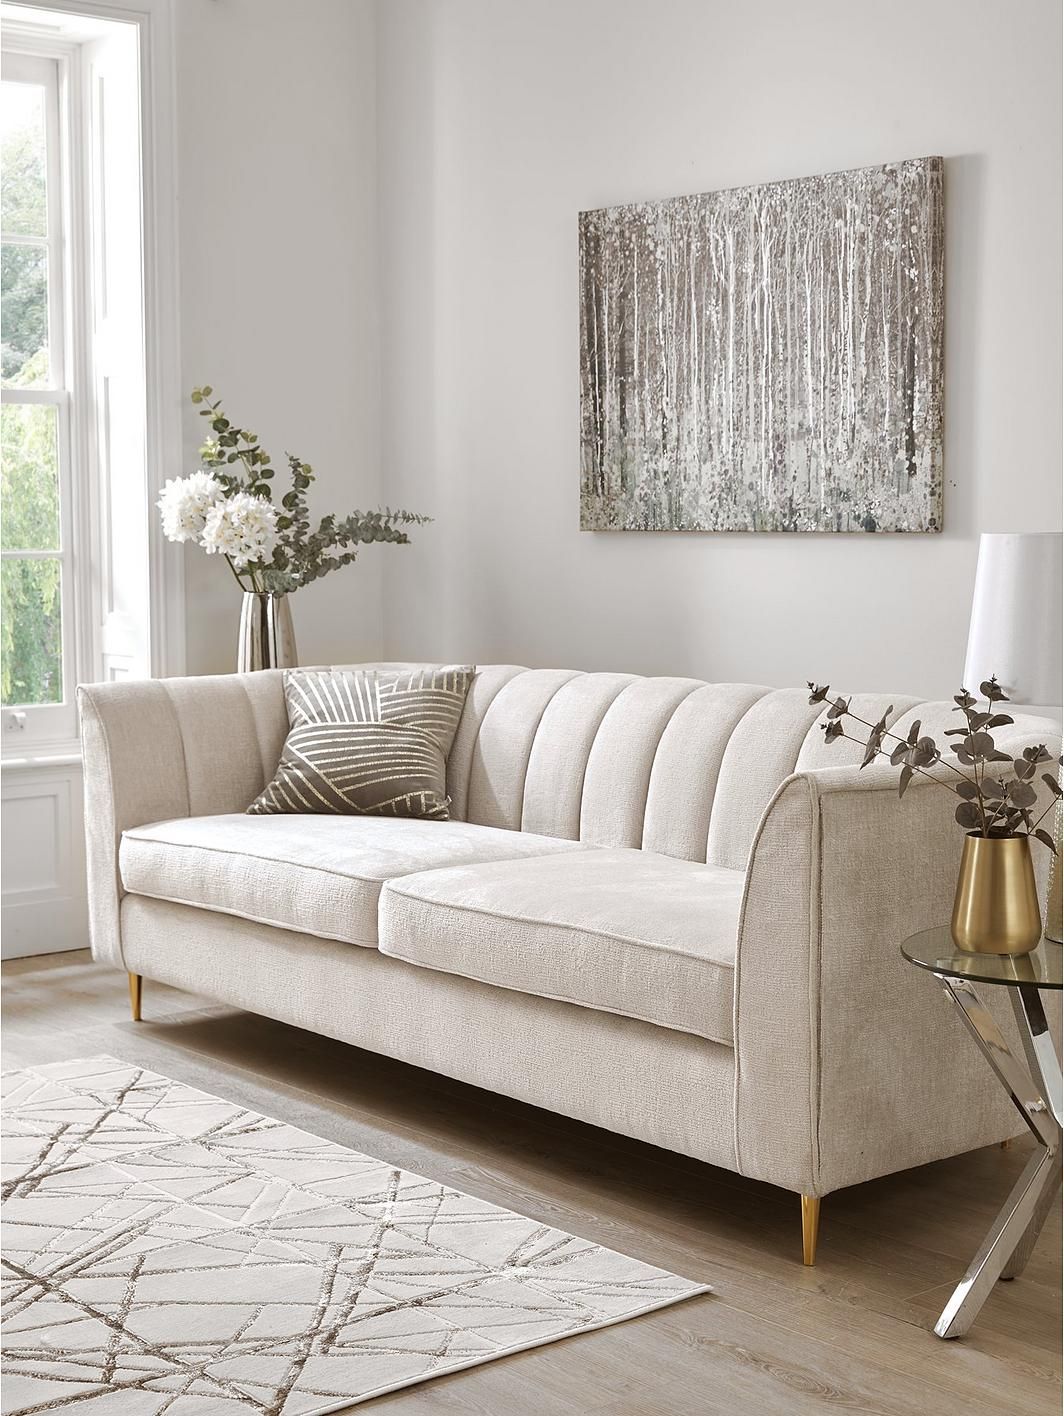 Install sofa and loveseat set to make
your living room elegant